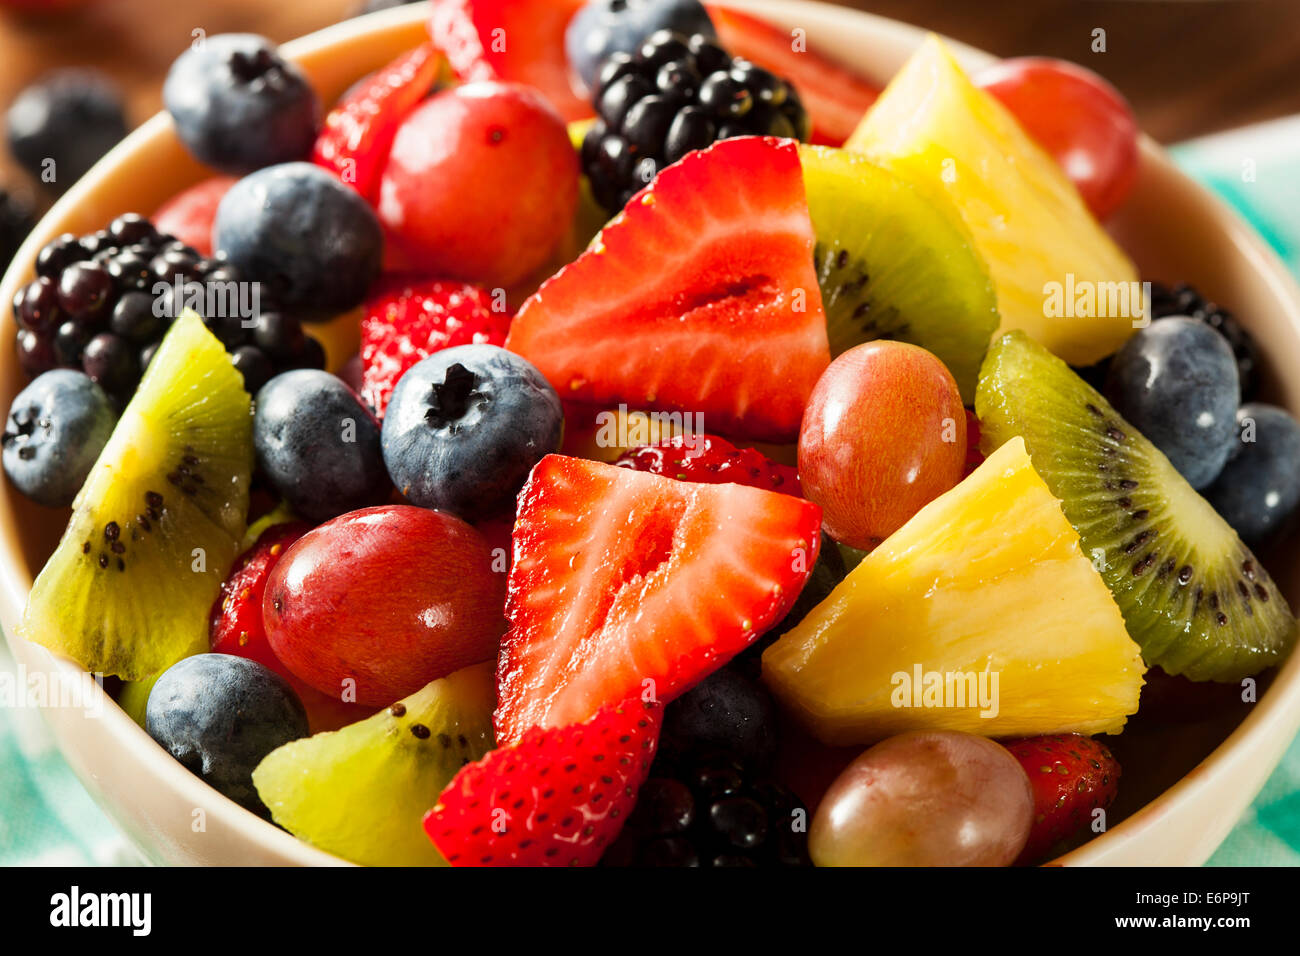 Heallthy Organic Fruit Salad with Berries Pineapple and Grapes Stock ...